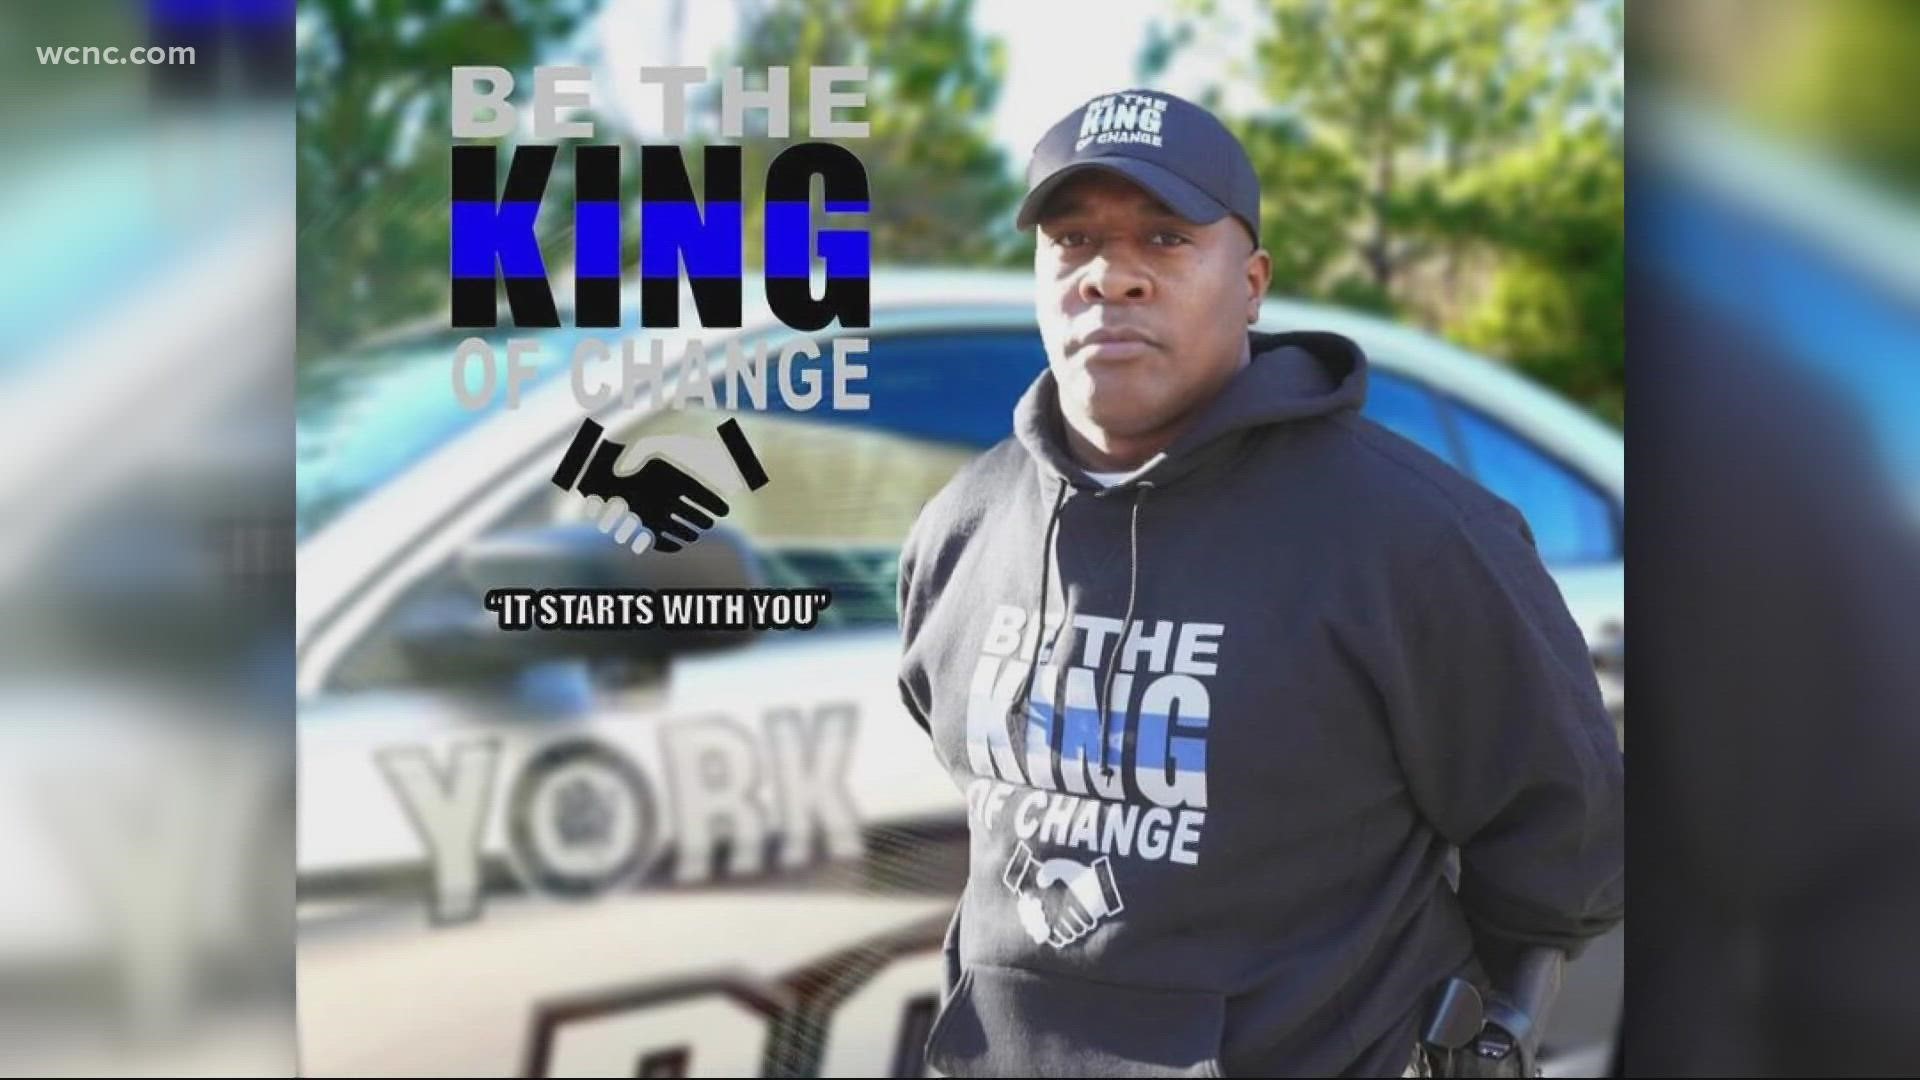 A York police officer is leading a movement to be the change in his community. He wants to open a dialogue surrounding policing.